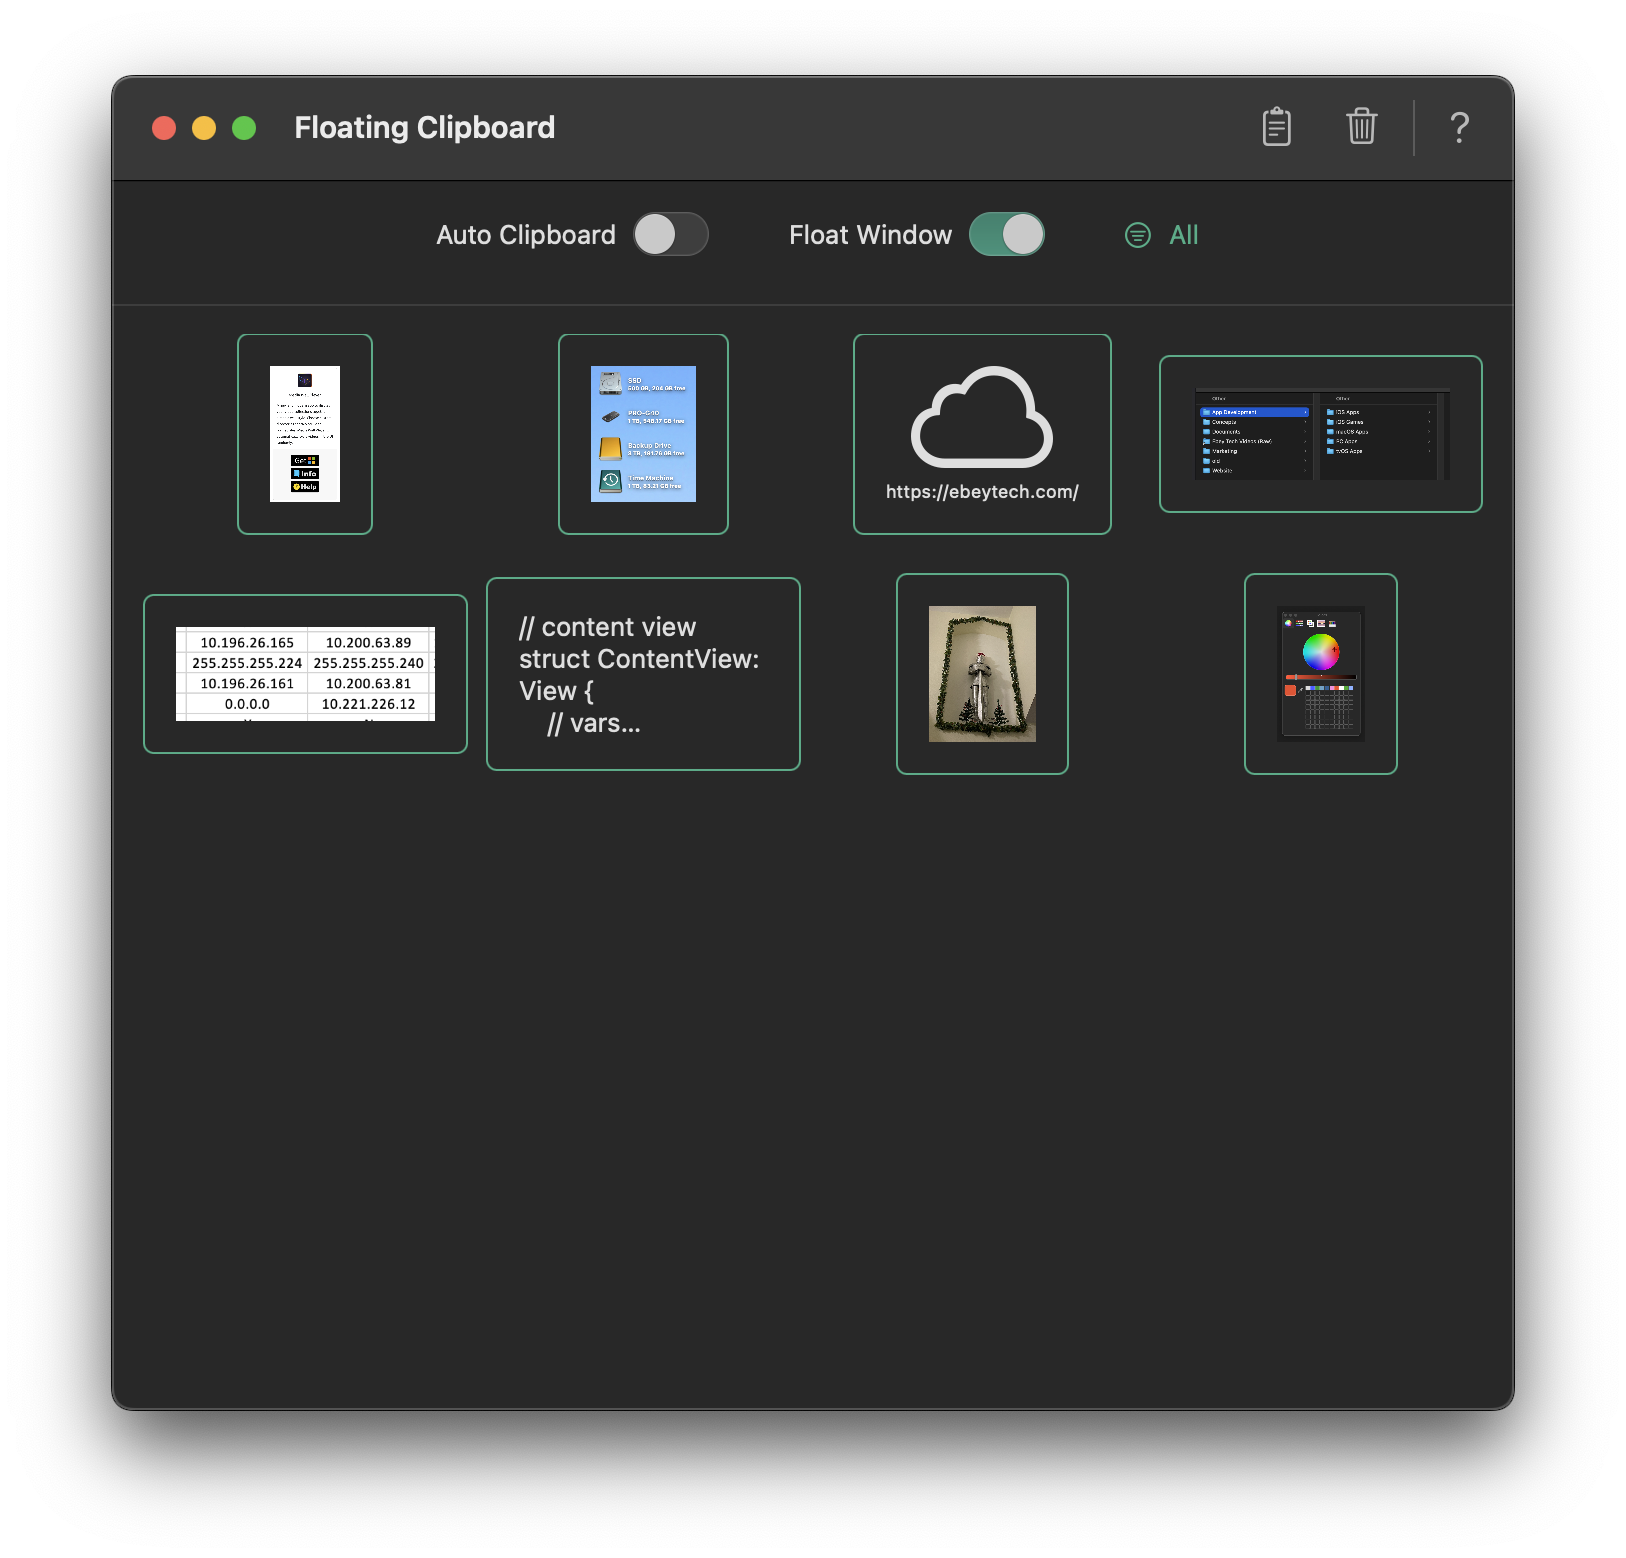 Clipboard History - Floating Clipboard for macOS